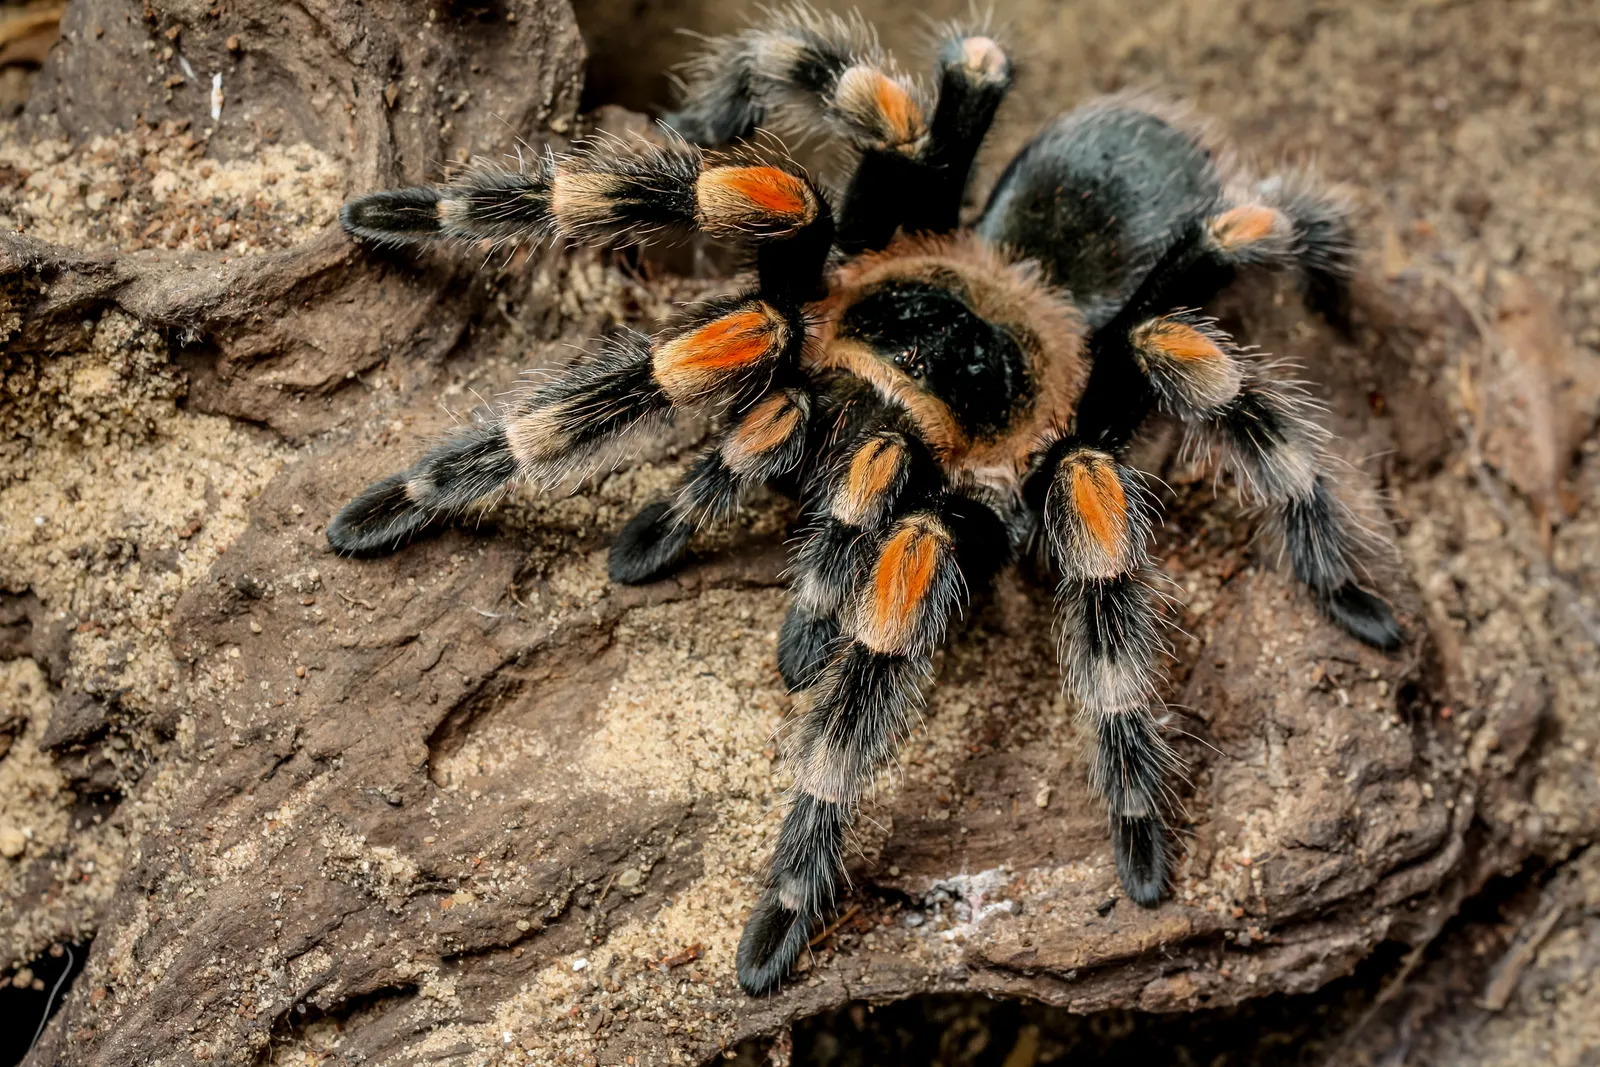 The Black Market Is Crawling With Spiders, New Study Finds